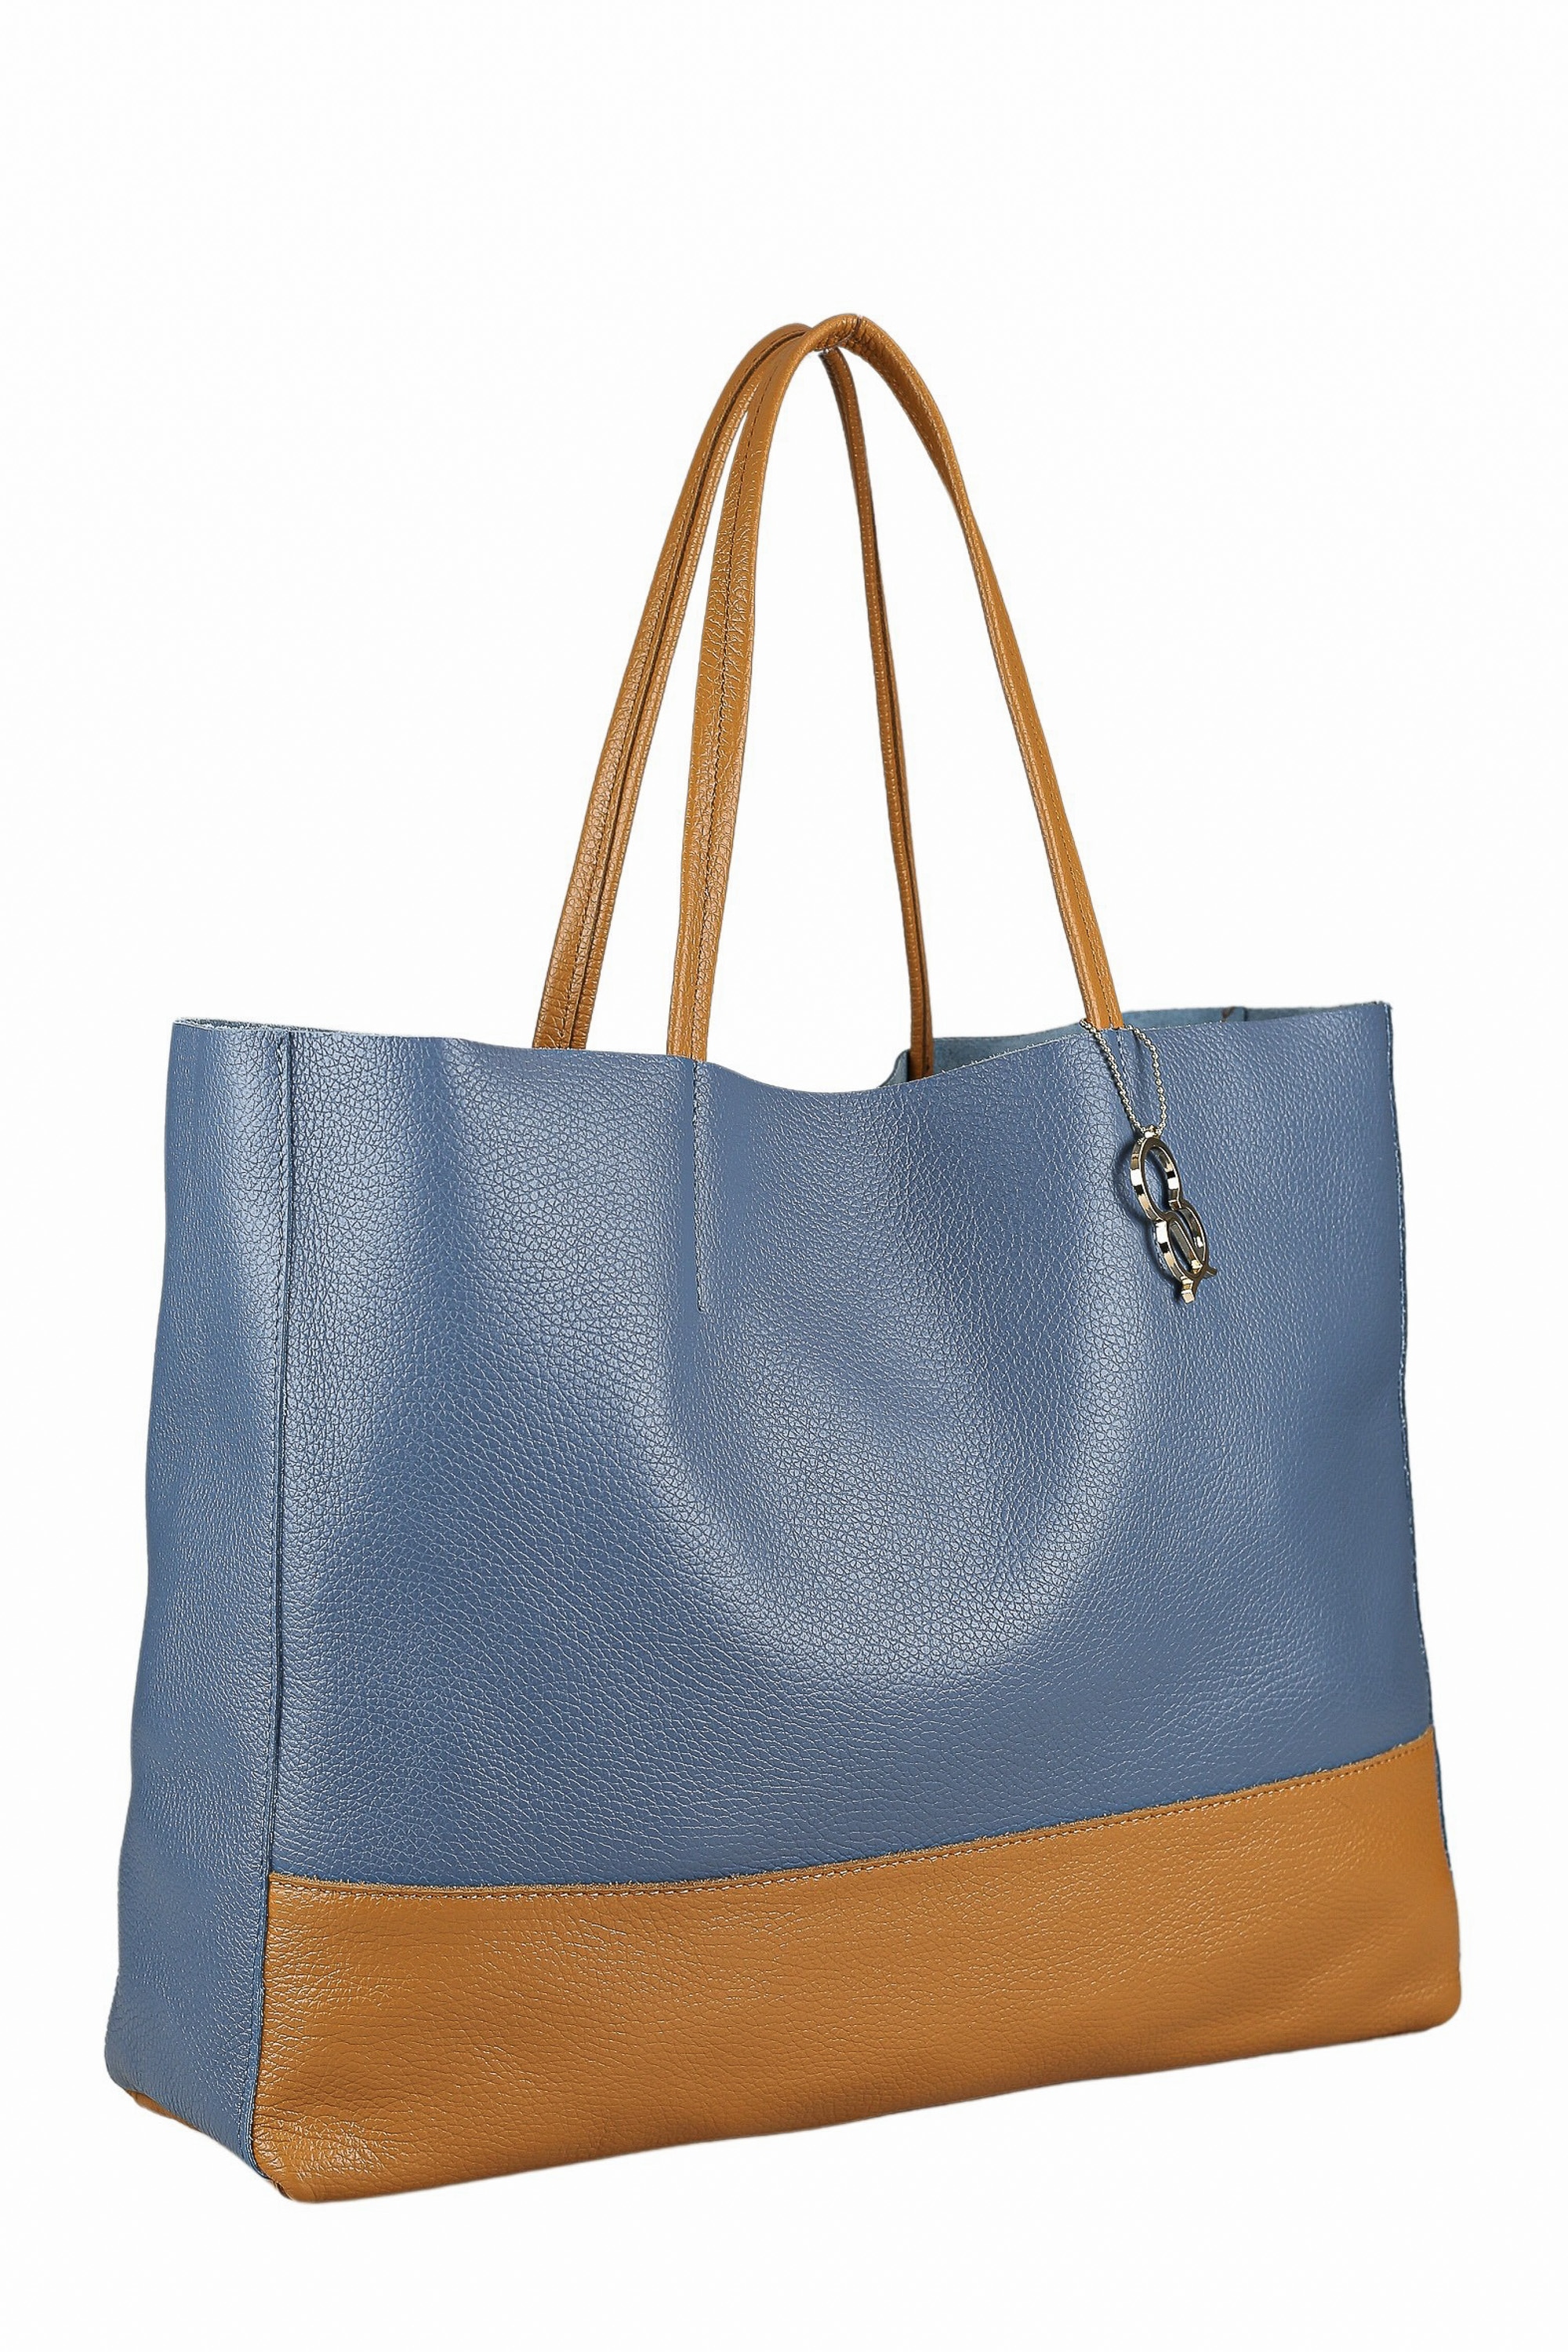 COLLEZIONE ALESSANDRO Schultertasche "Barb", Echt Leder, Made in Italy